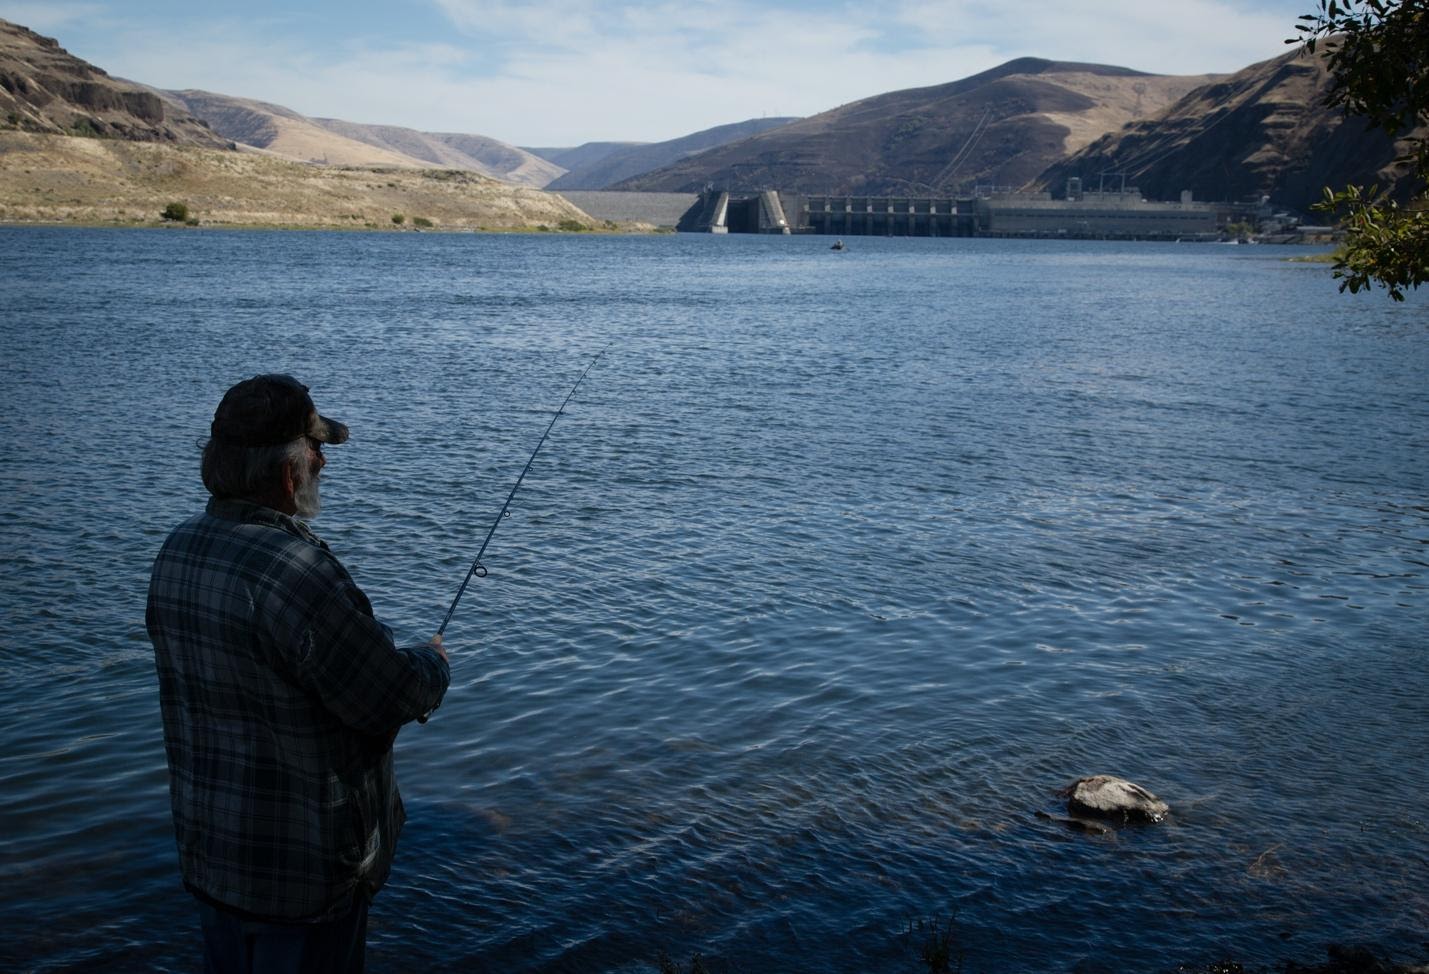 A man in a plaid flannel casts his fishing line below a dam on a wide blue river